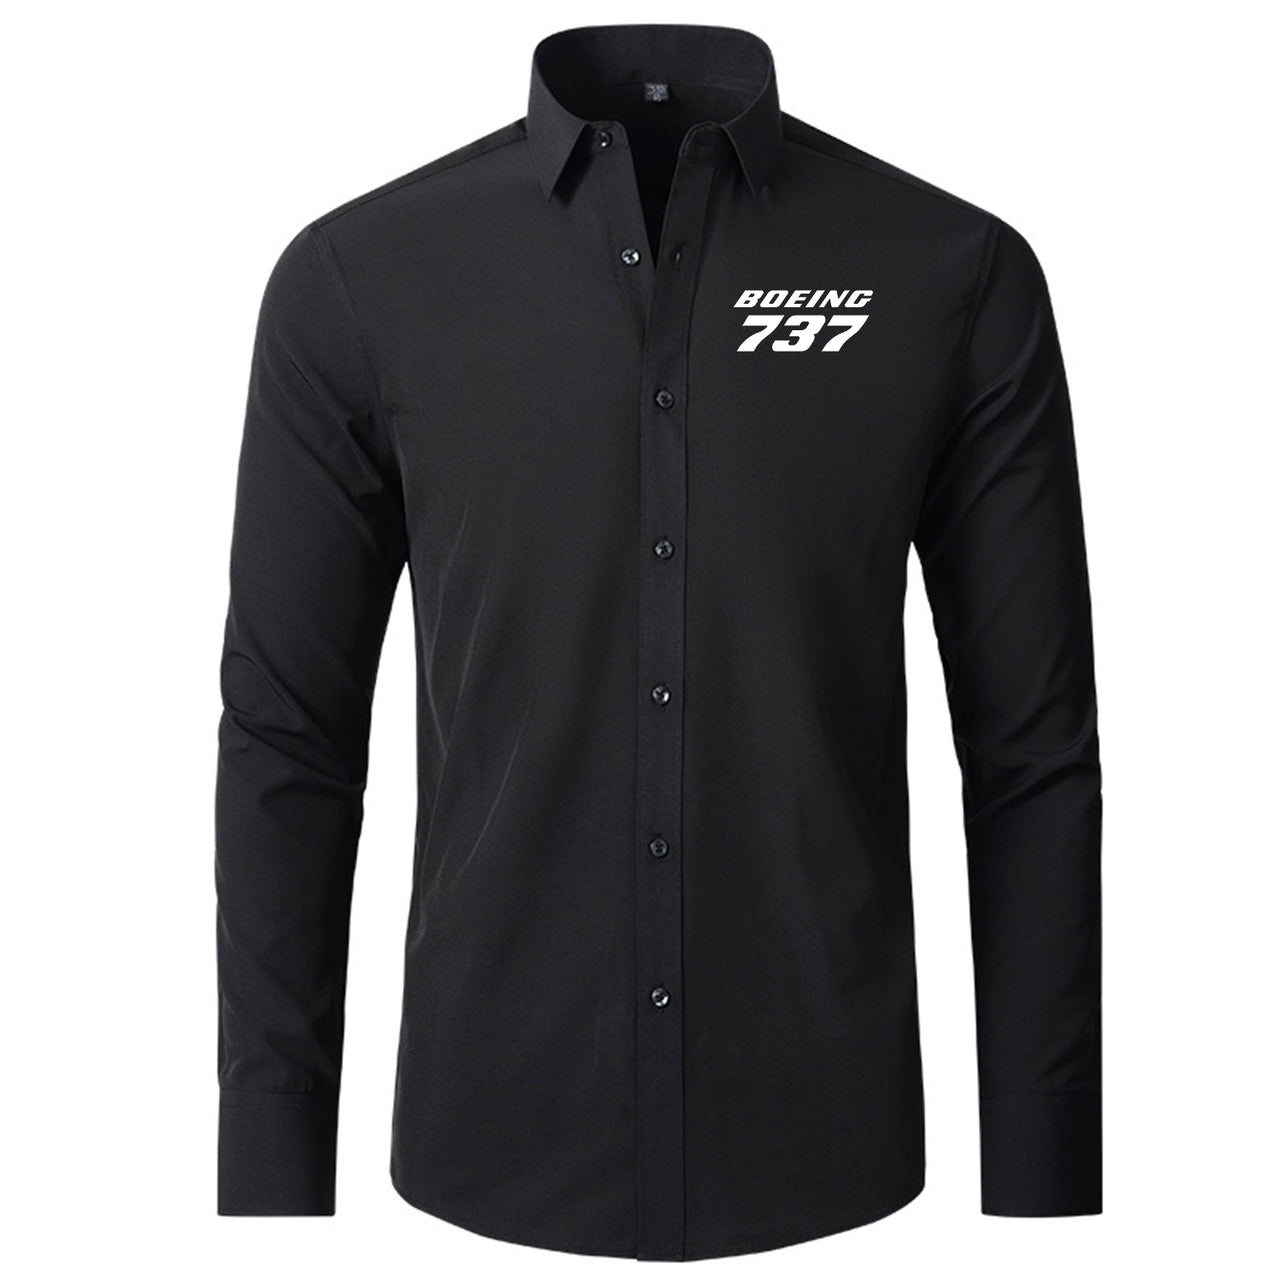 Boeing 737 & Text Designed Long Sleeve Shirts